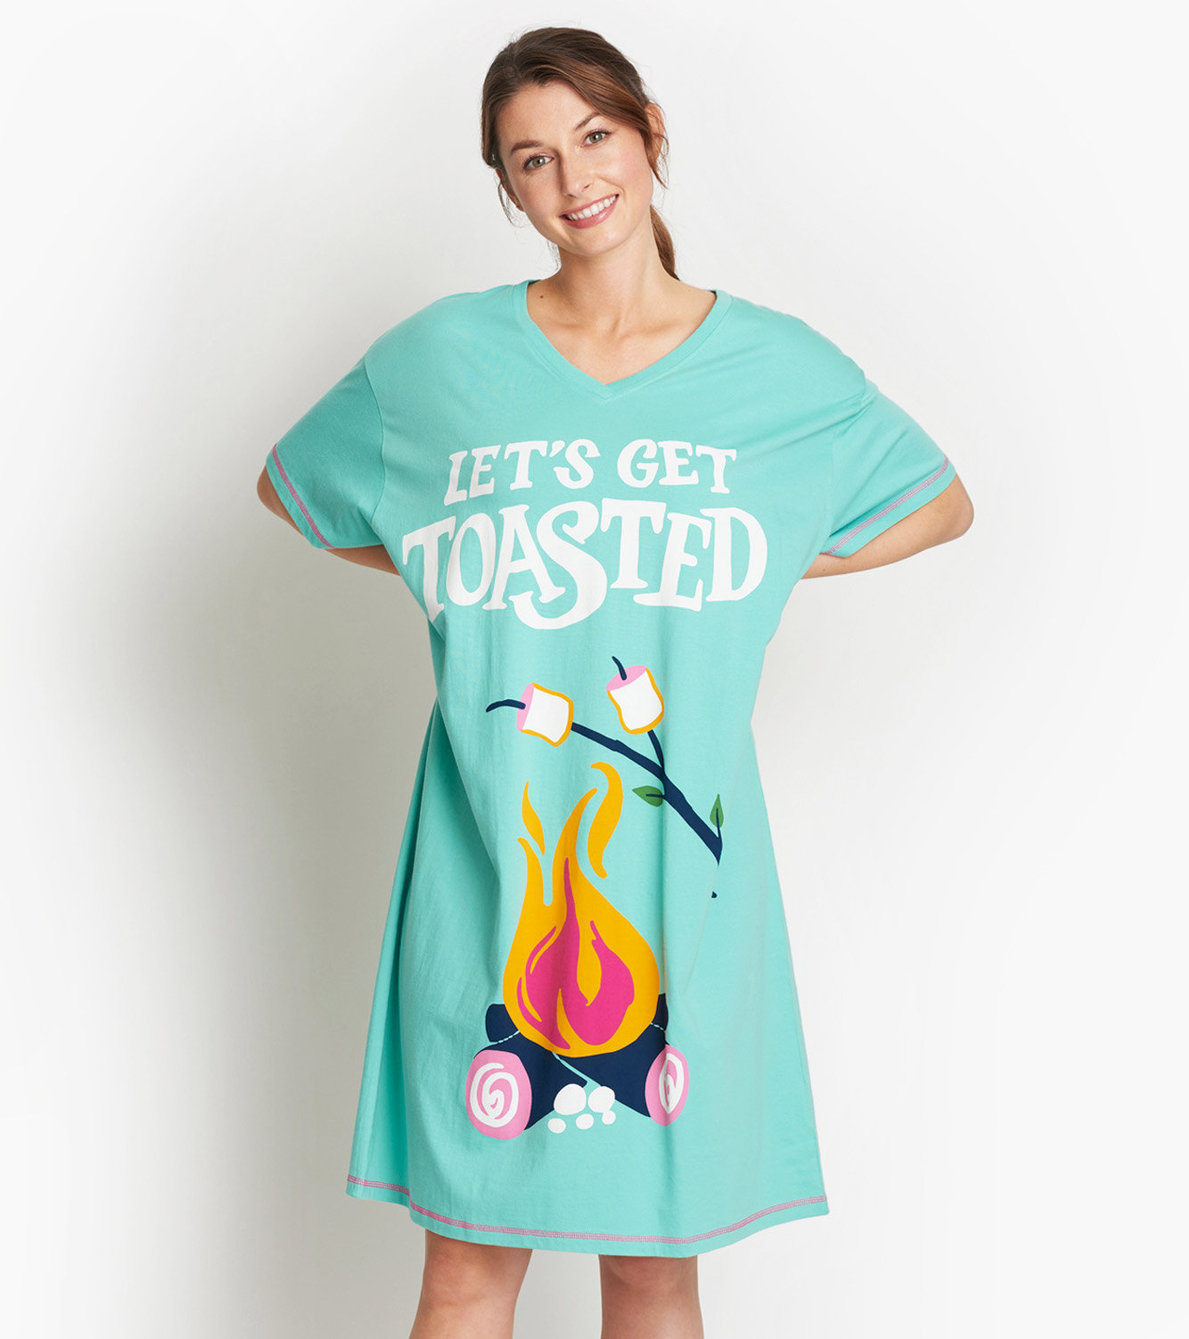 View larger image of Let's Get Toasted Women's Sleepshirt